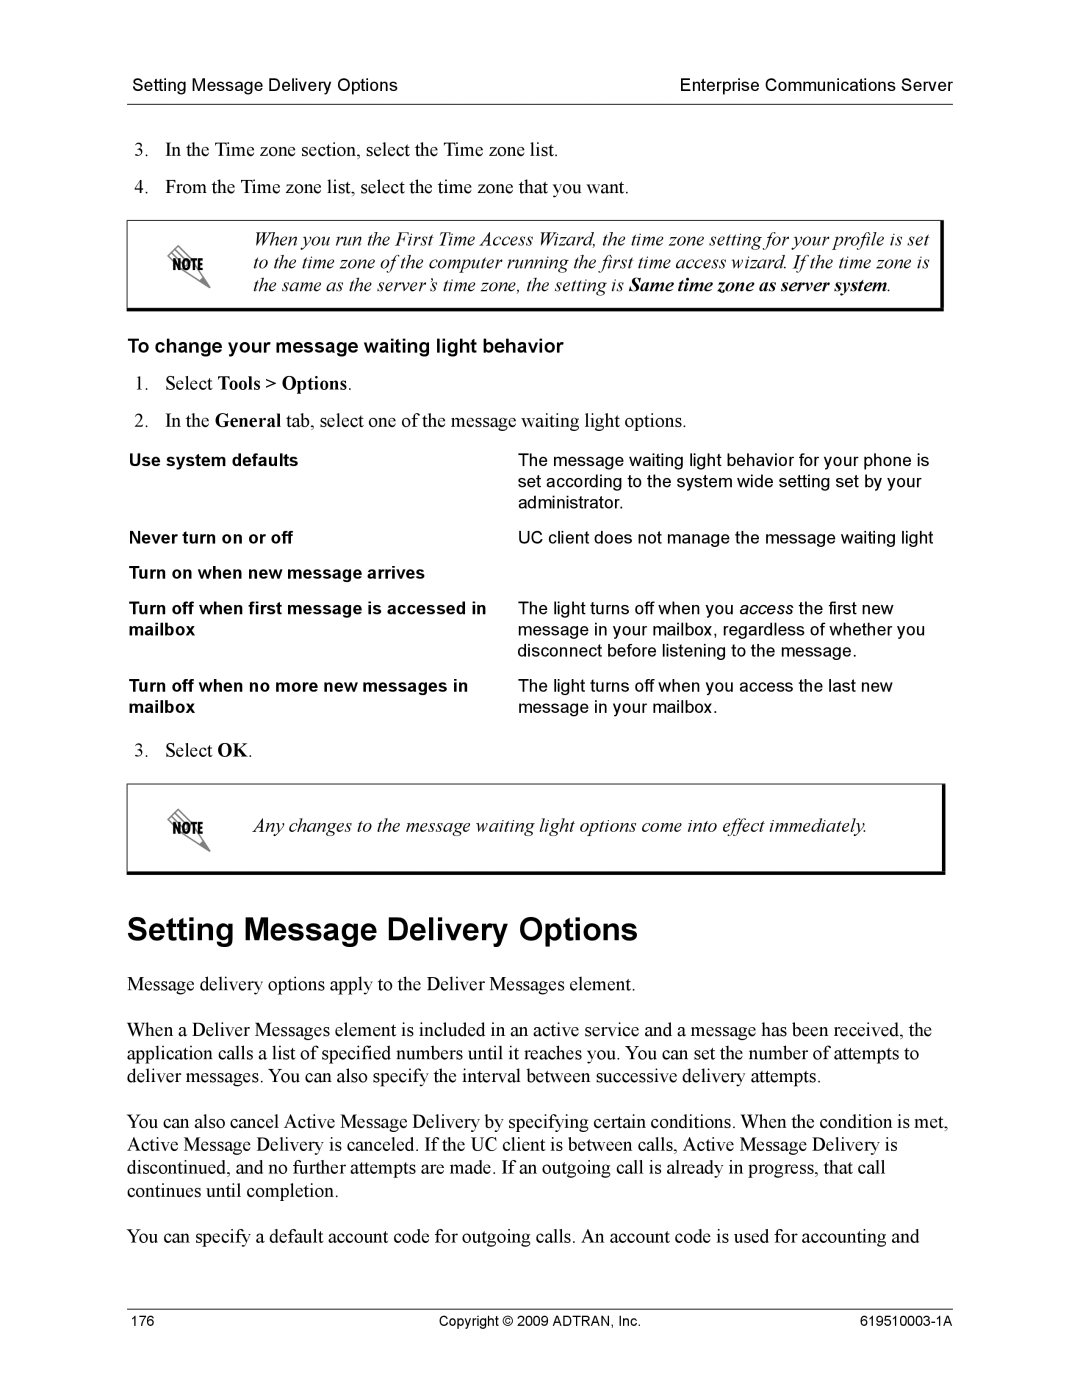 ADTRAN 619510003-1A Setting Message Delivery Options, To change your message waiting light behavior, Select Tools Options 